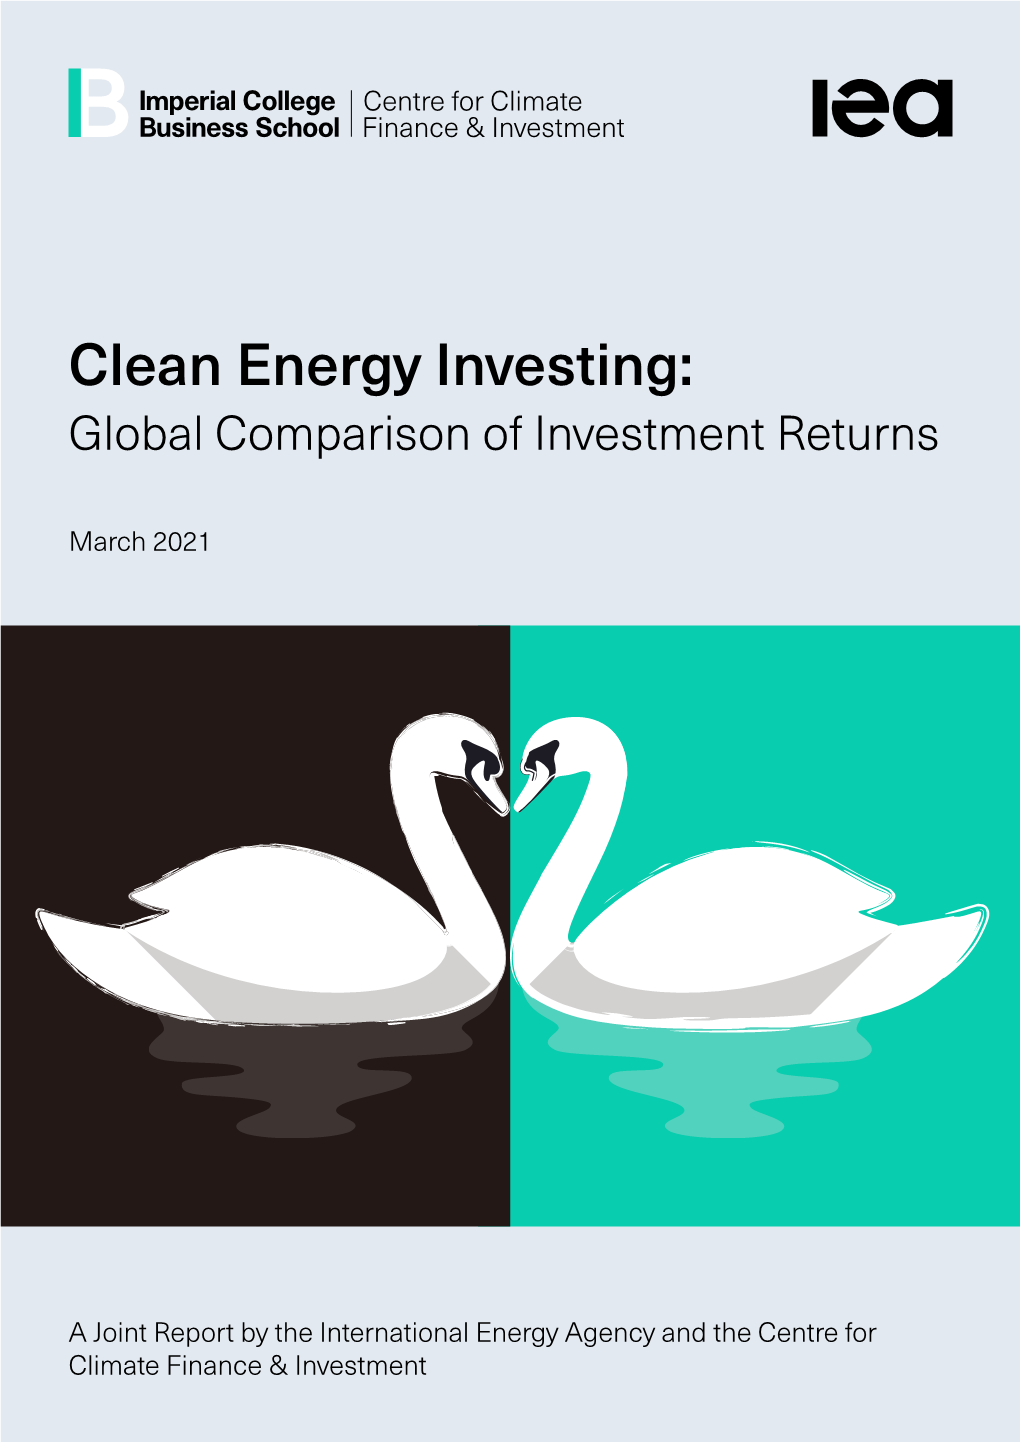 Clean Energy Investing: Global Comparison of Investment Returns